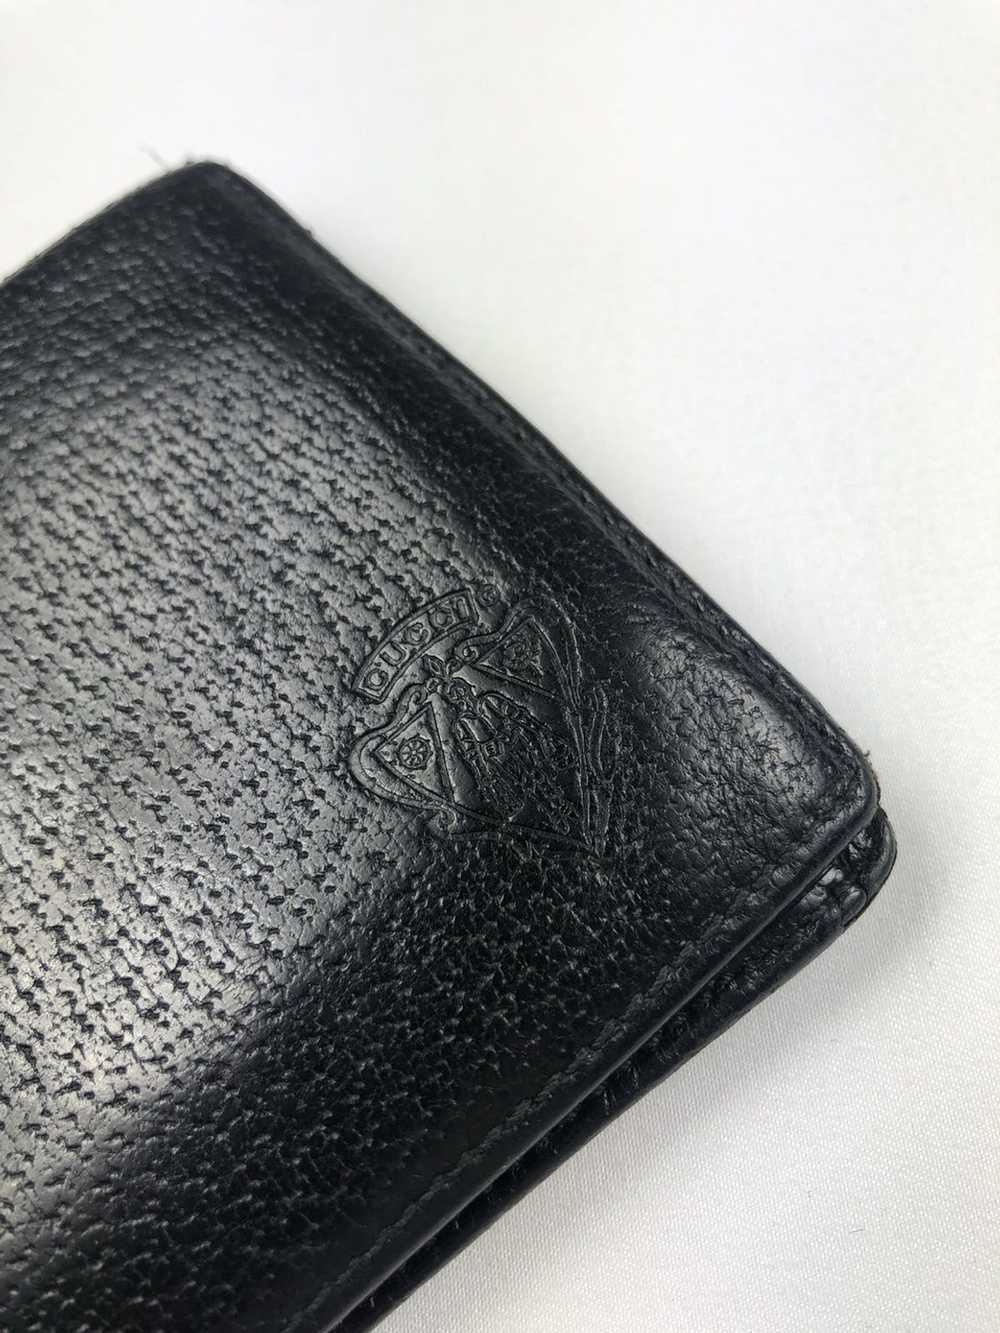 Gucci Gucci crest leather bifold wallet - image 4